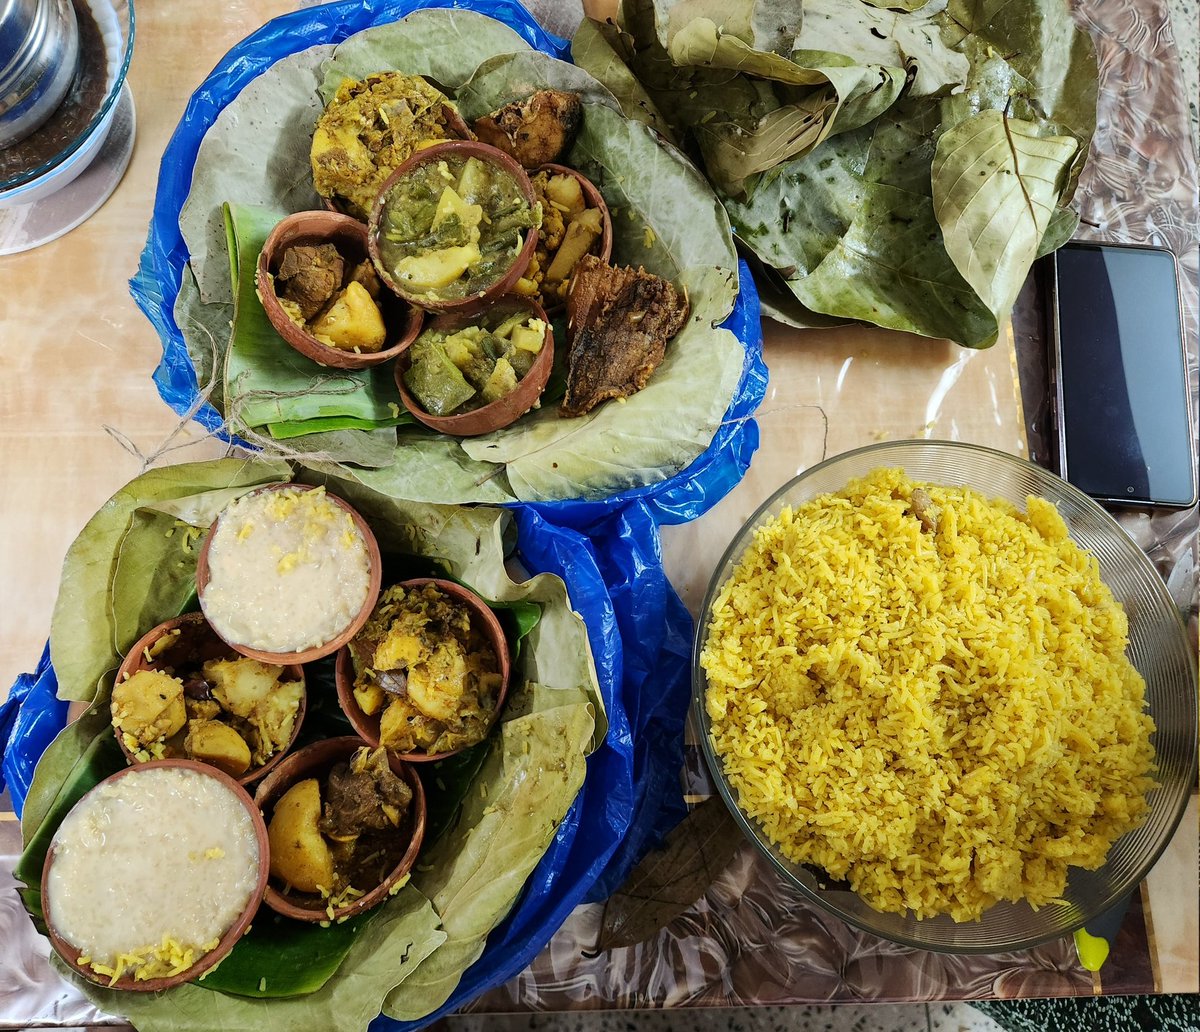 I'm proud to be a non veg Hindu Bengali. Here I'm attaching a pic of Bhog Prosad of Kalighat which consists of Basanti Polao, Shukto, Bandhakopi(Cabbage), Macher Matha(Fish), Kochi Pathar jhol(Mutton) and Payesh. We offer our goddesses what our ancestors offered for centuries.